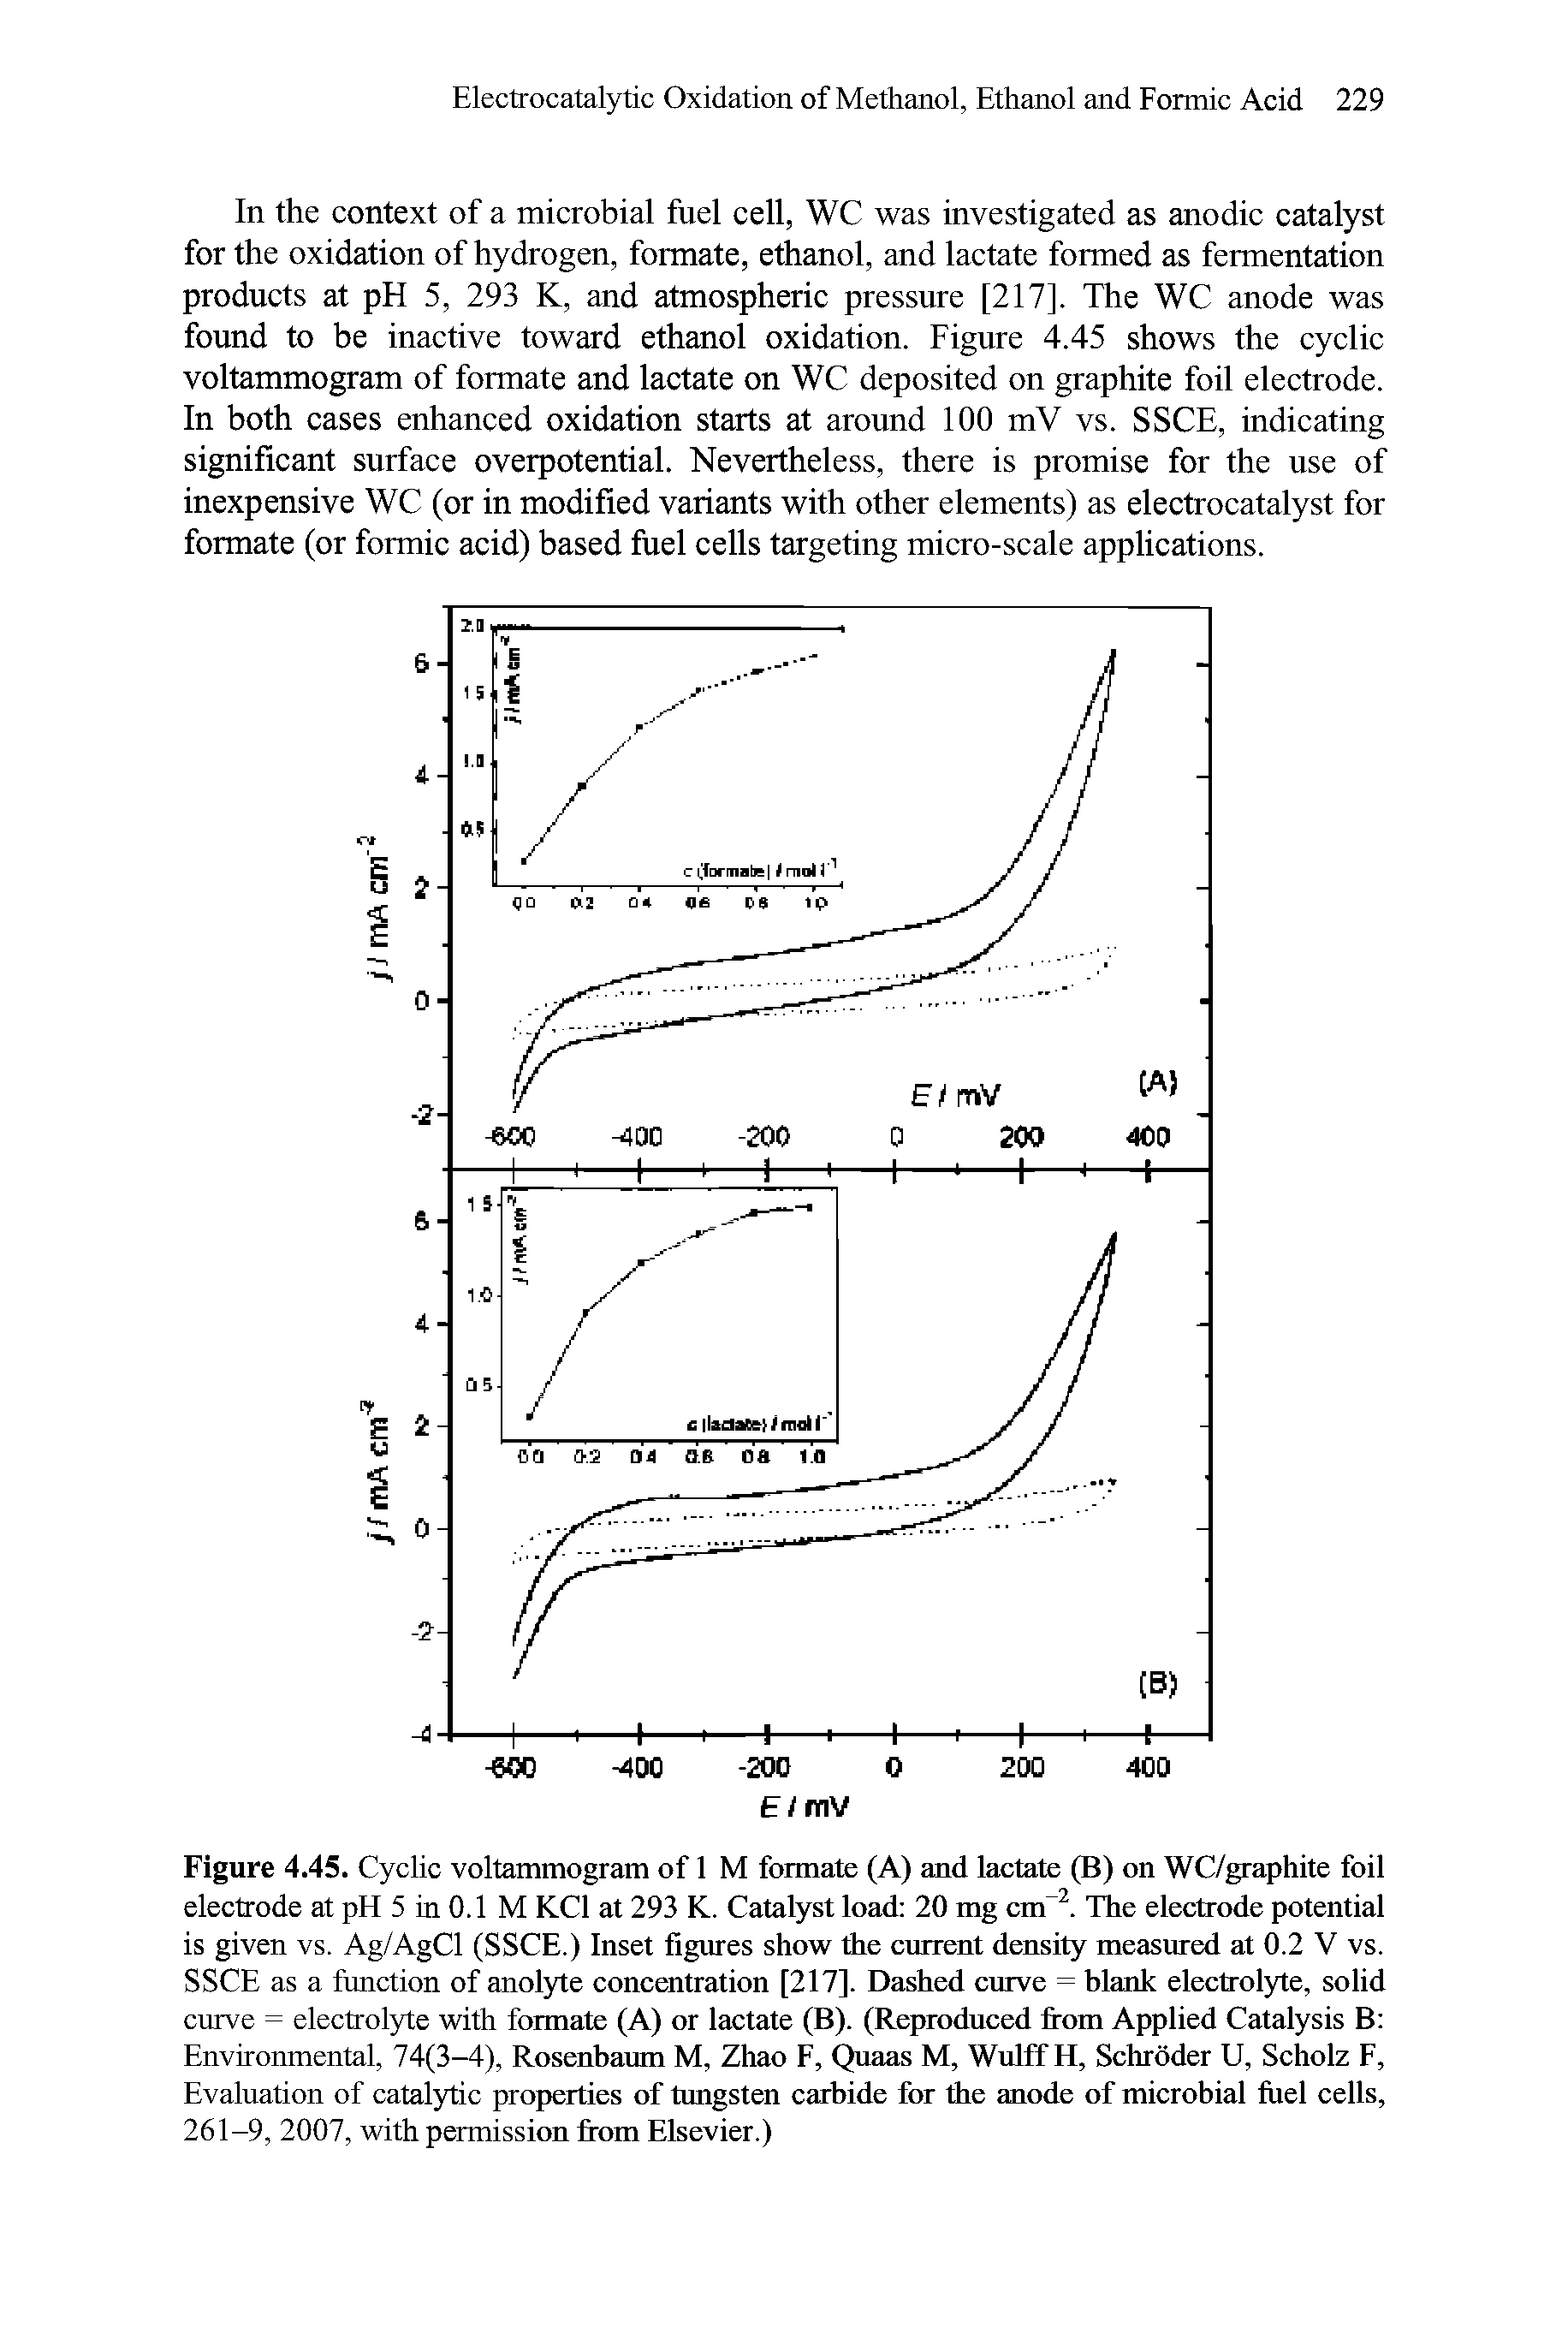 Figure 4.45. Cyclic voltammogram of 1 M formate (A) and lactate (B) on WC/graphite foil electrode at pH 5 in 0.1 M KCl at 293 K. Catalyst load 20 mg cm. The electrode potential is given vs. Ag/AgCl (SSCE.) Inset figures show the eurrent density measured at 0.2 V vs. SSCE as a function of anolyte concentration [217]. Dashed curve = blank electrolyte, solid curve = electrolyte with formate (A) or lactate (B). (Reproduced from Applied Catalysis B Environmental, 74(3-4), Rosenbaum M, Zhao F, Quaas M, WulffH, Schroder U, Scholz F, Evaluation of catalytic properties of tungsten carbide for the anode of microbial fuel cells, 261-9, 2007, with permission from Elsevier.)...